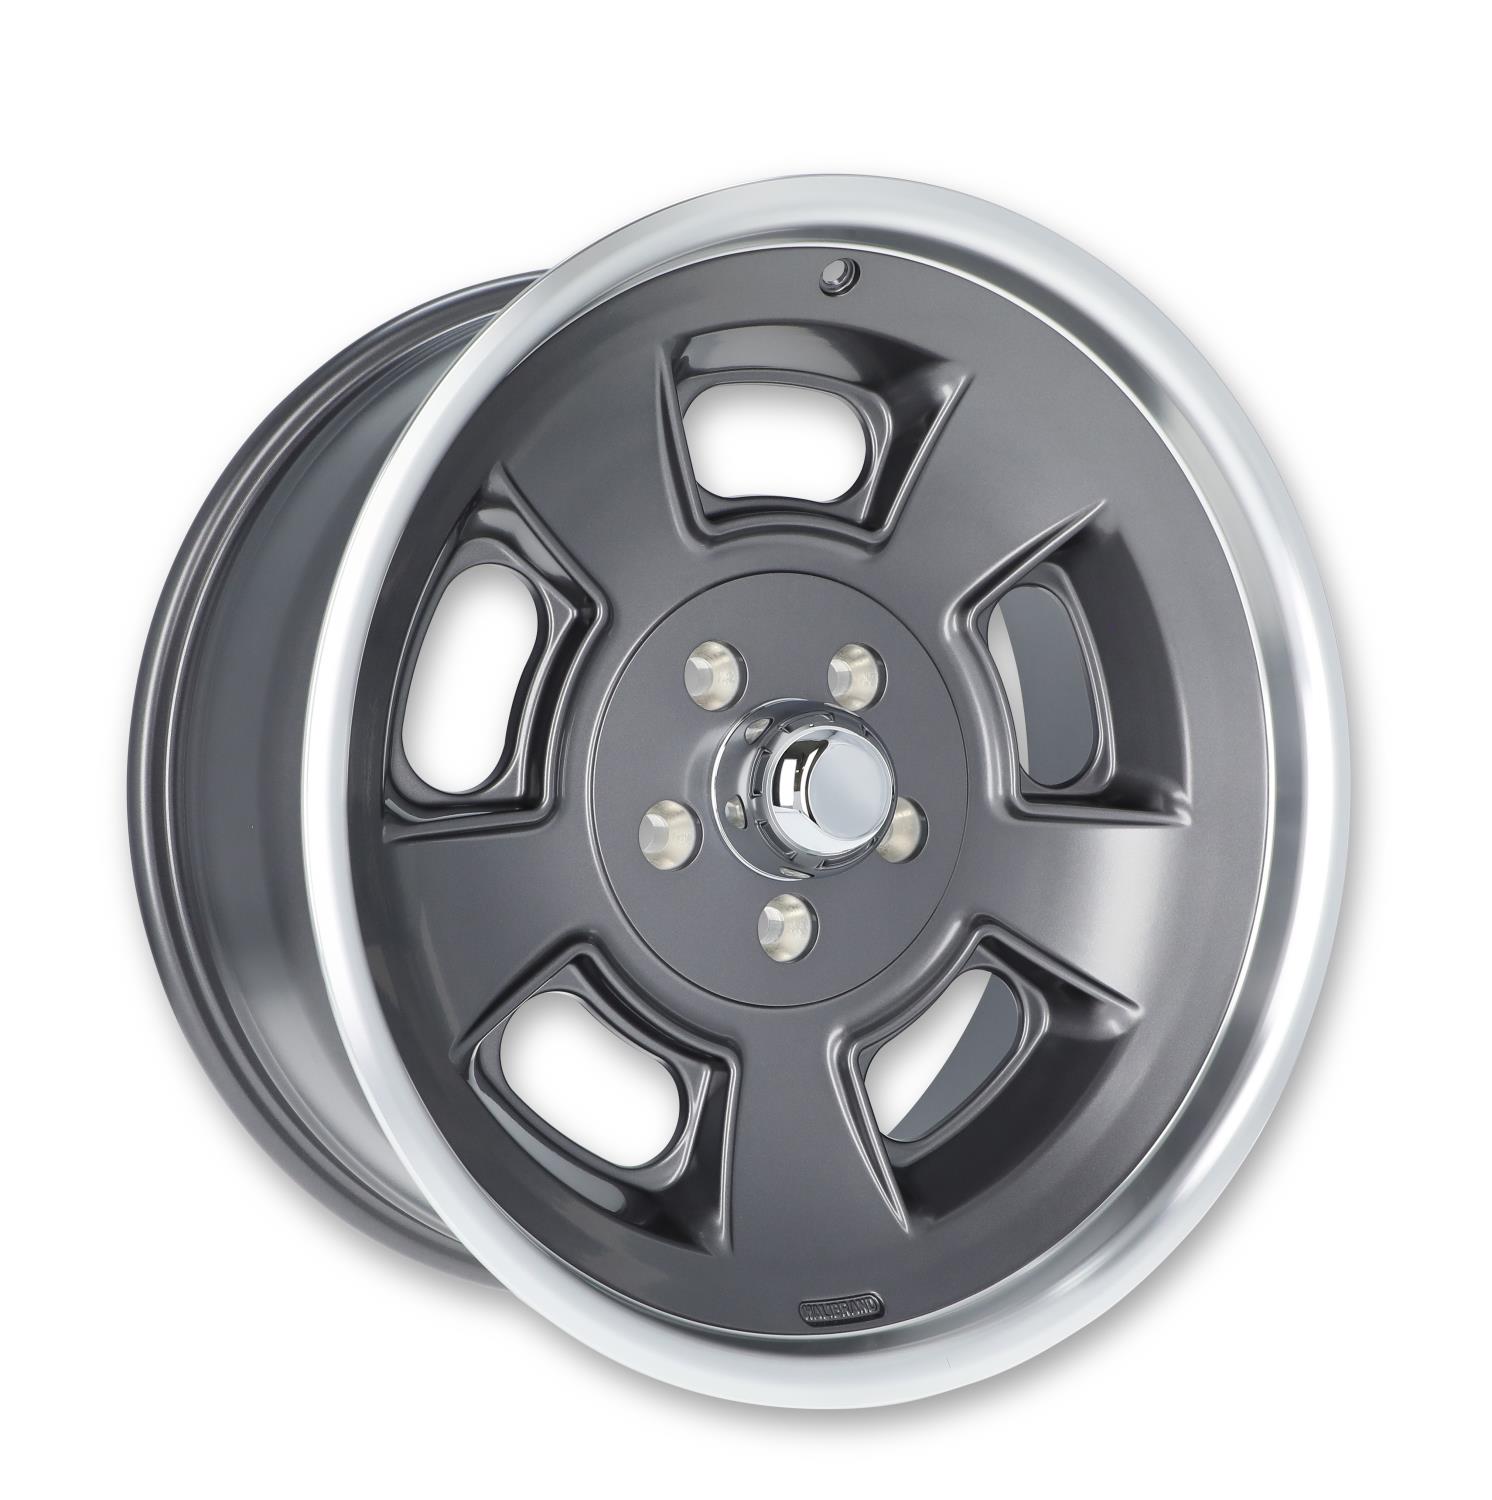 Sprint Front Wheel, Size: 19x8.5", Bolt Pattern: 5x5", Backspace: 4.75" [Anthracite with Machined Lip - Semi Gloss Clearcoat]